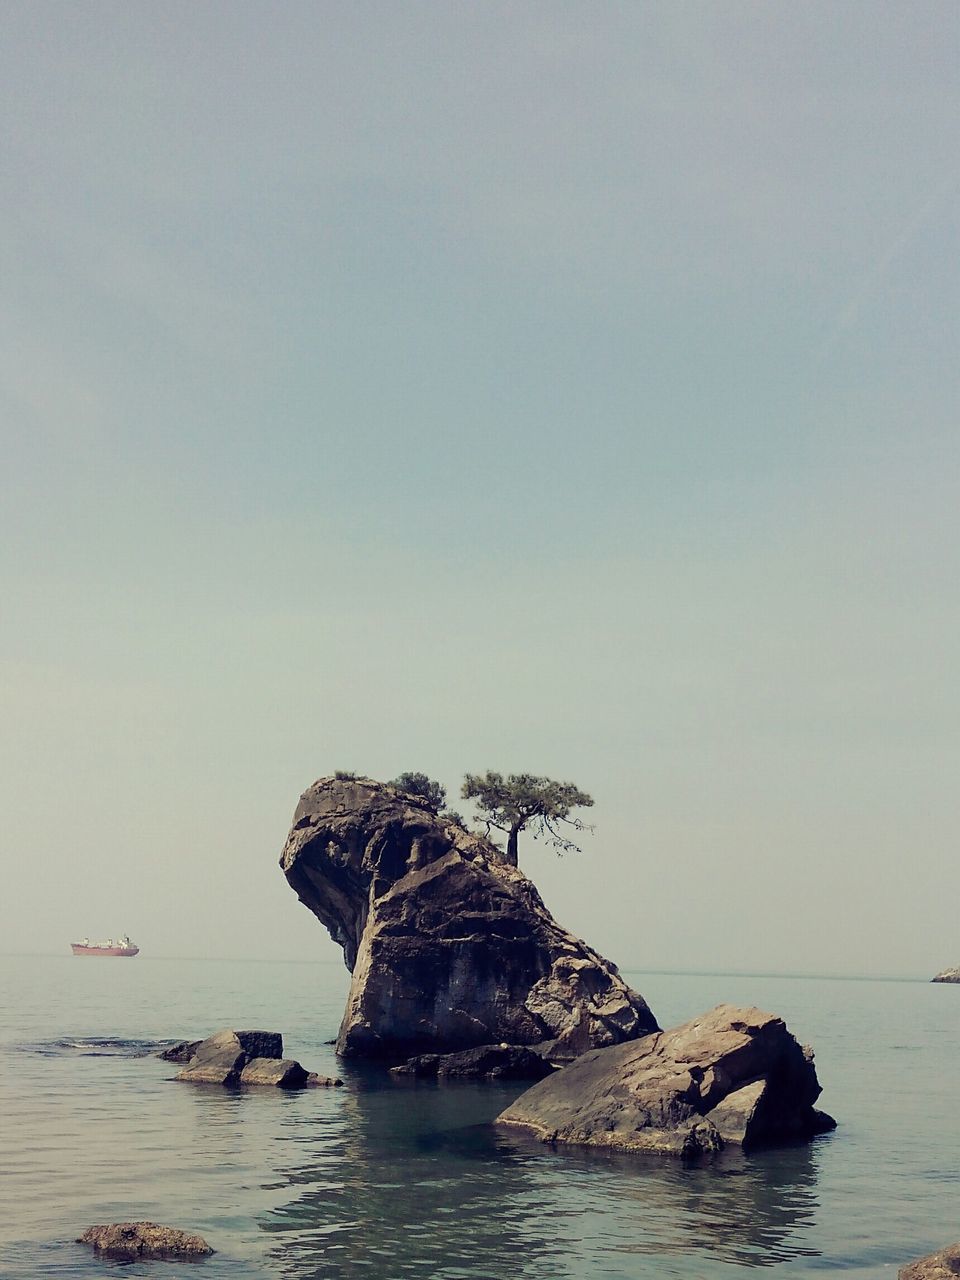 water, sea, rock - object, waterfront, nautical vessel, tranquility, scenics, tranquil scene, rock formation, horizon over water, beauty in nature, boat, nature, clear sky, transportation, sky, mode of transport, copy space, cliff, rock